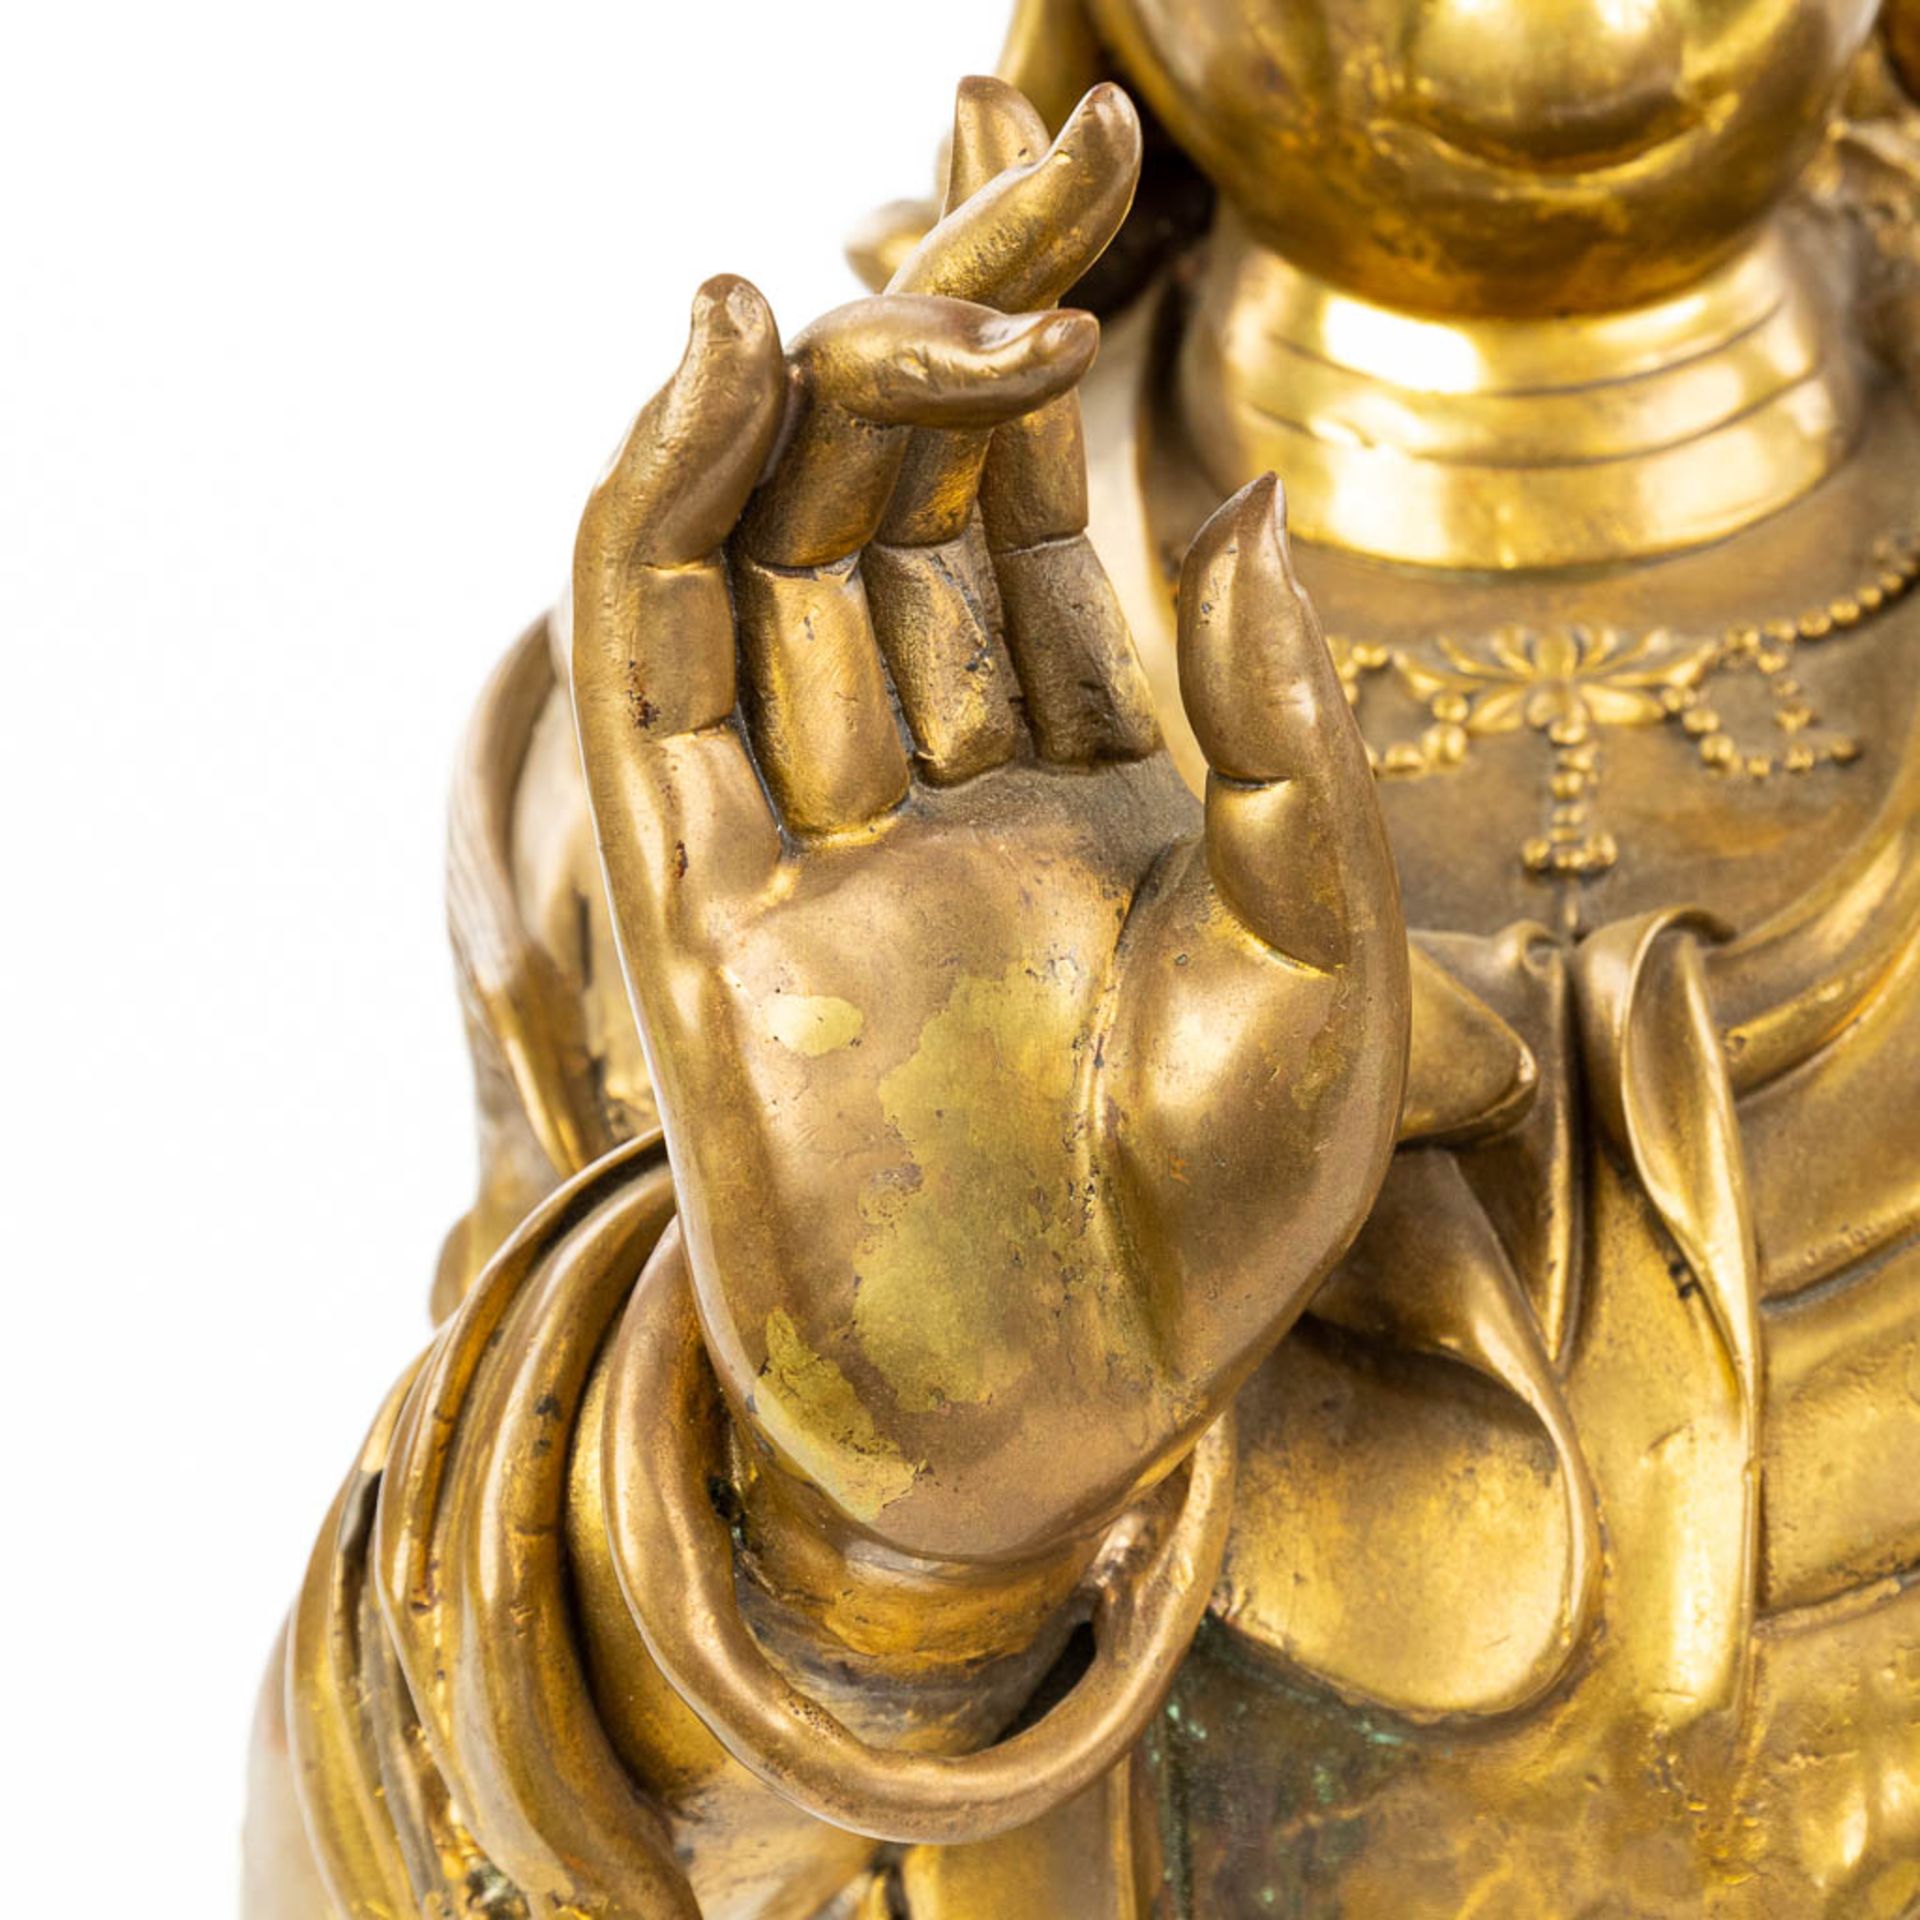 A figurine of Guanyin made of bronze. (H:43cm) - Image 7 of 10